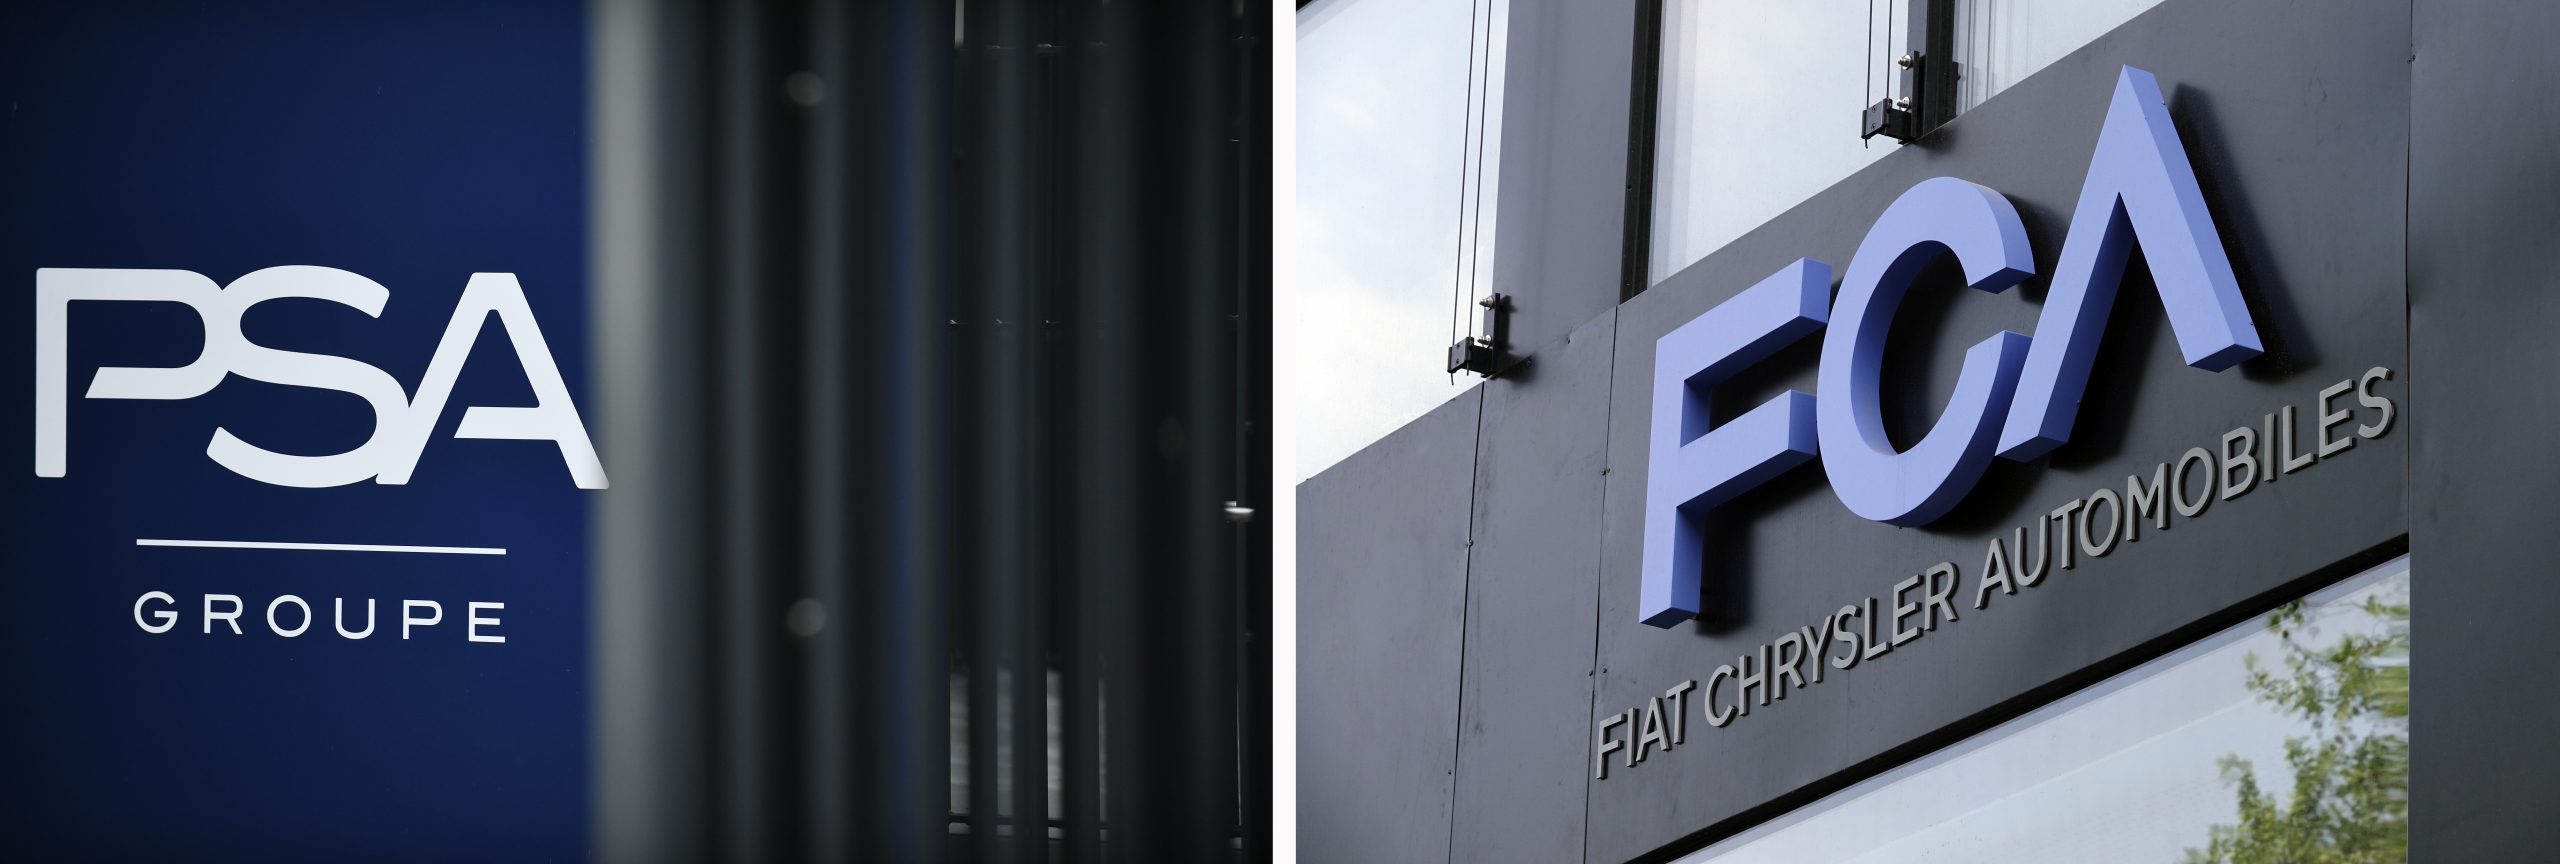 epa08918832 (FILE) - A view of signage at the PSA Group headquarters in Rueil-Malmaison, near Paris, France, 31 October 2019 (L) and signage of Italian-US car manufacturer FCA, Fiat Chrysler Automobiles, at an office building in Frankfurt am Main, Germany, 04 May 2018 (reissued 04 January 2021). Media reports on 04 January state SA Group  and FCA are on 04 May looking for approval from both companies' shareholders for their planned 52 billion USD merger deal. If approved, the deal would create world's 4th biggest car maker that the two plan to call  Stellantis.  EPA/JULIEN DE ROSA / MAURITZ ANTIN *** Local Caption *** 56457163